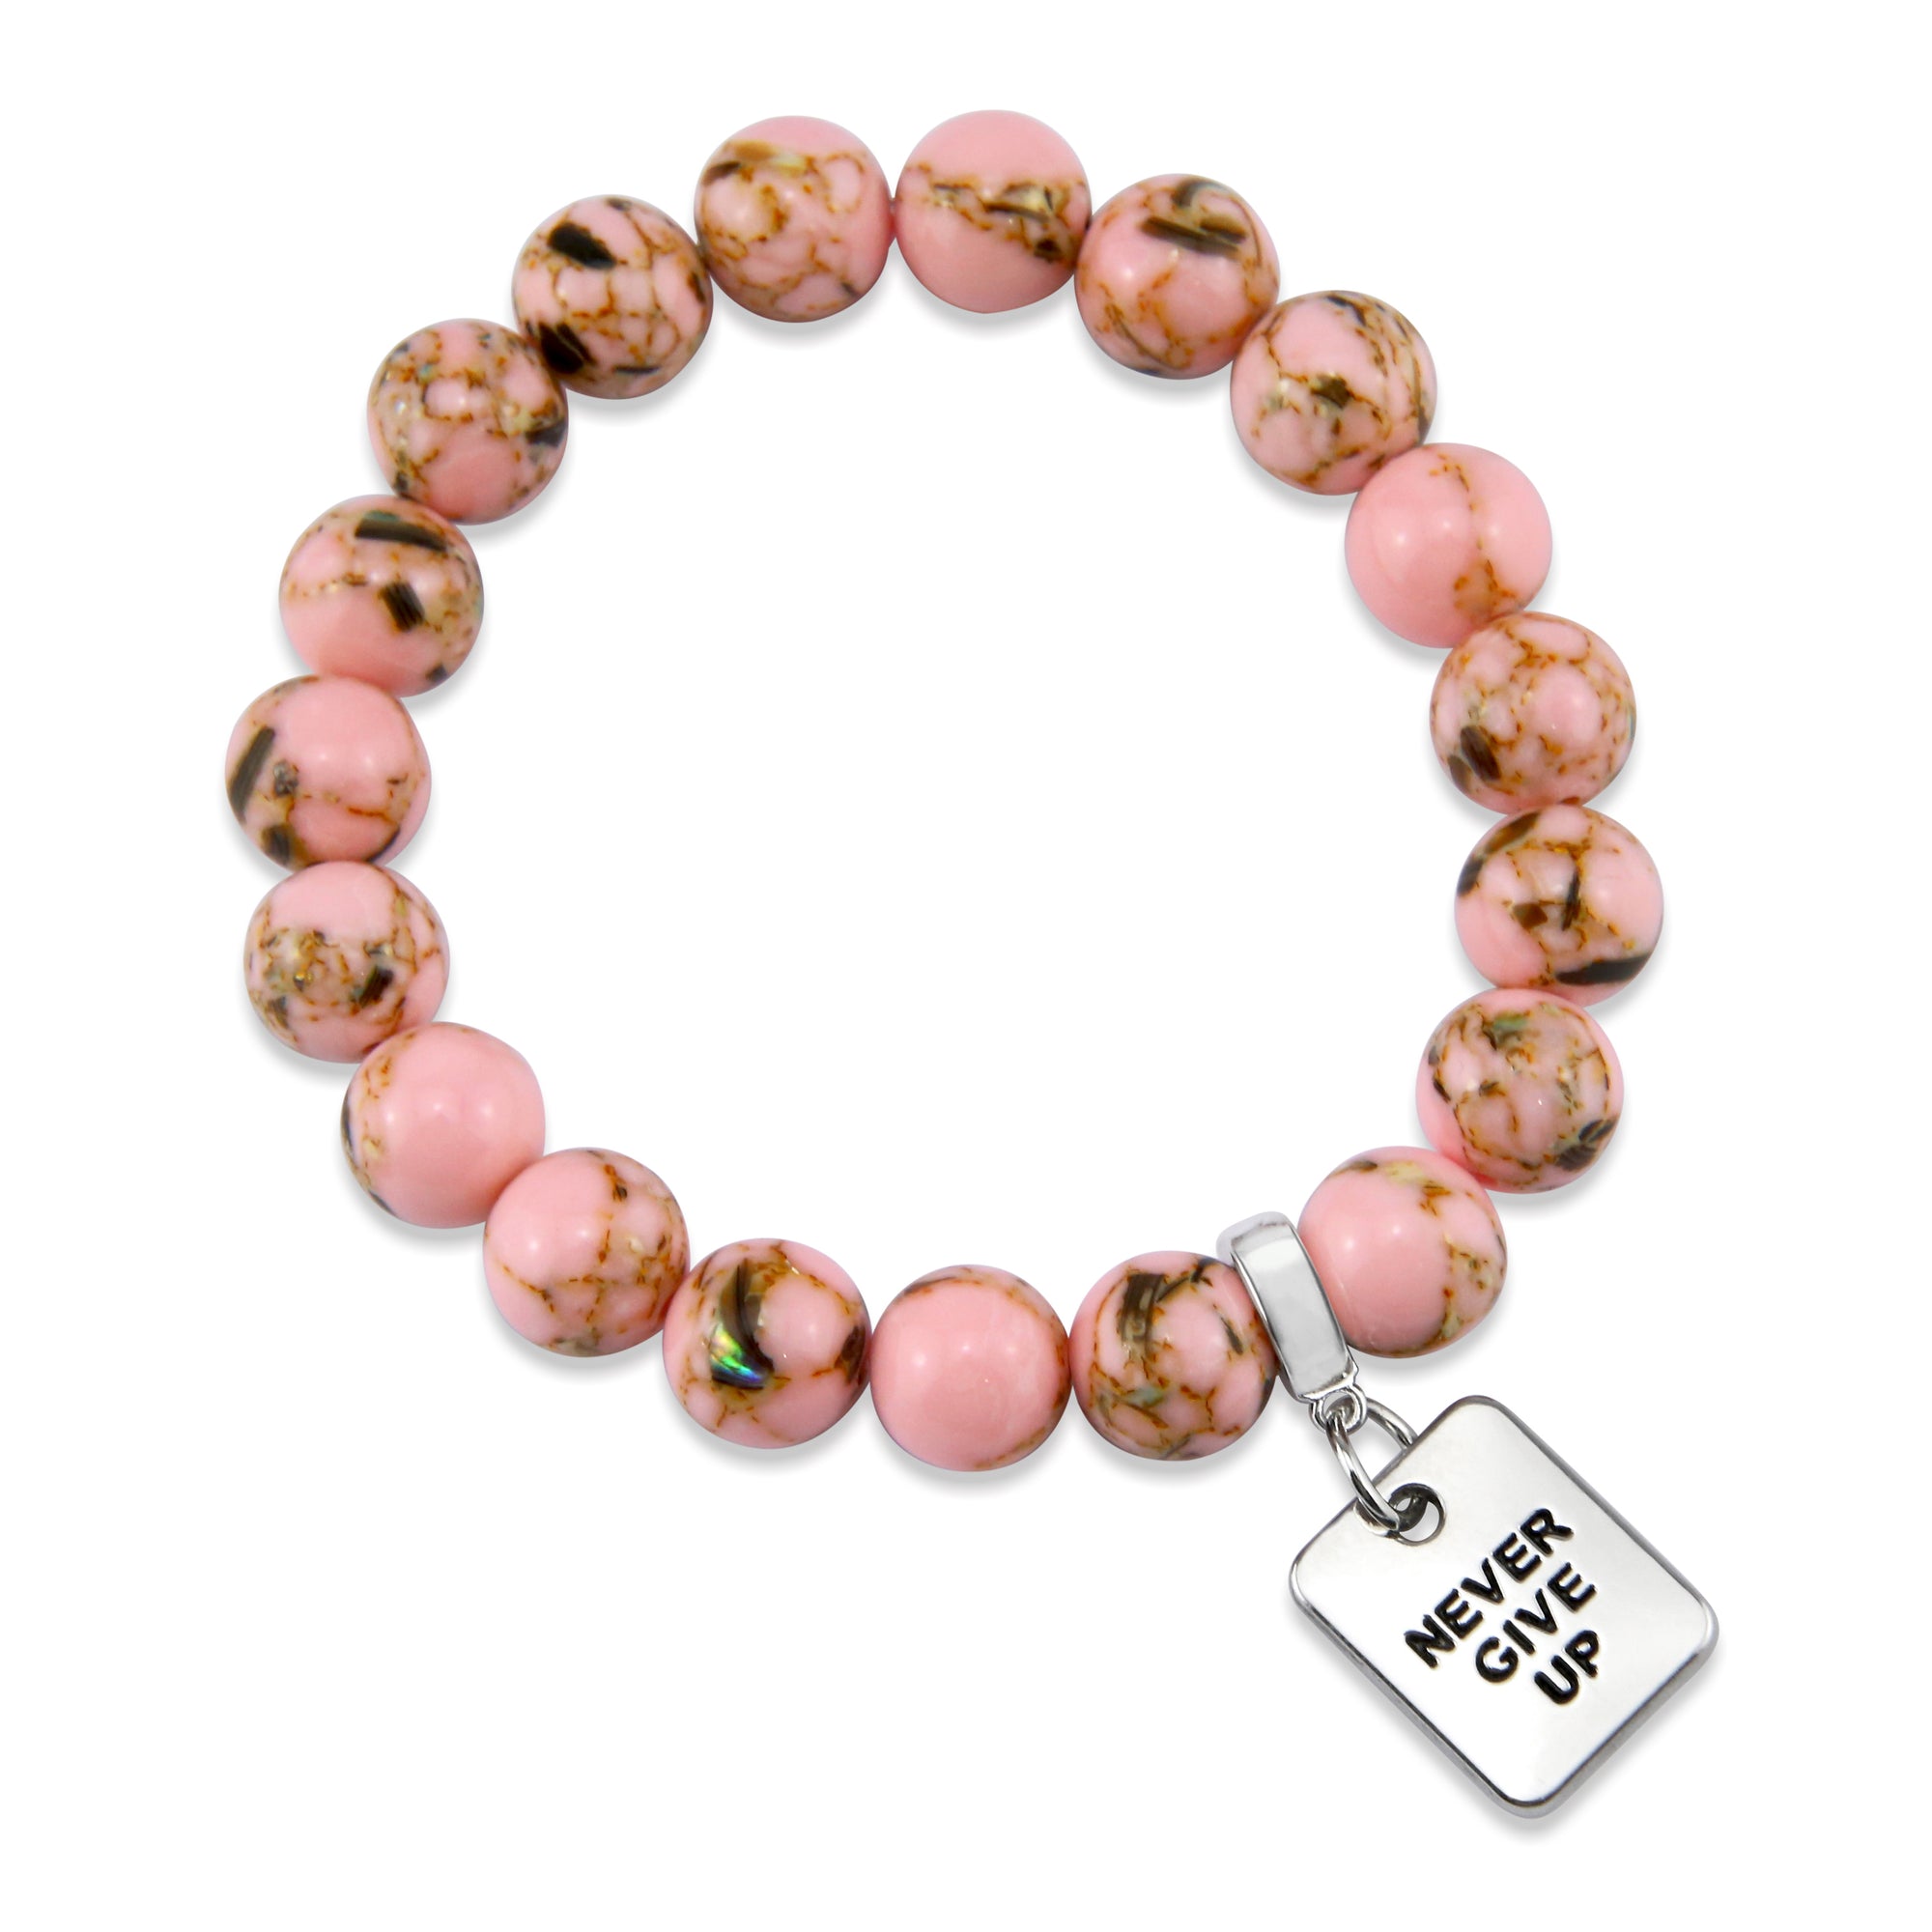 Soft Pink Synthesis Stone 10mm Bead Bracelet with Never Give Up Silver Word Charm. Fundraiser for the National Breast Cancer Foundation